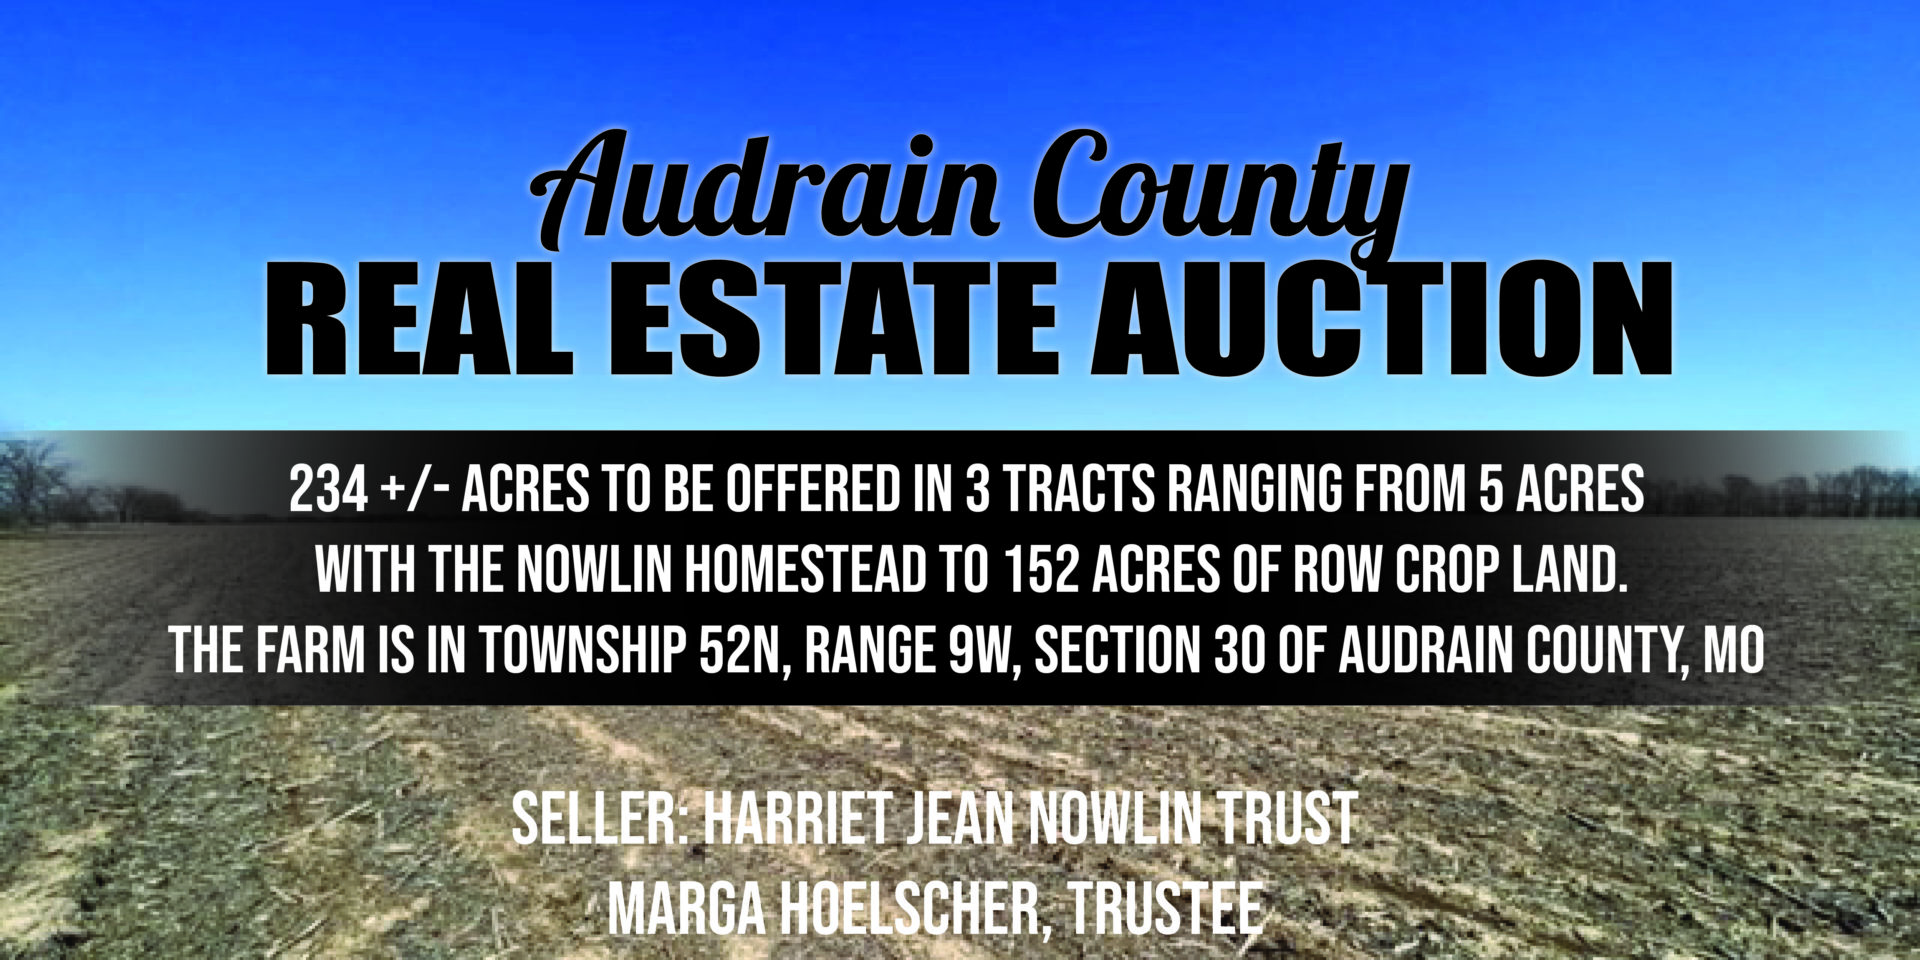 Audrain County Real Estate Auction